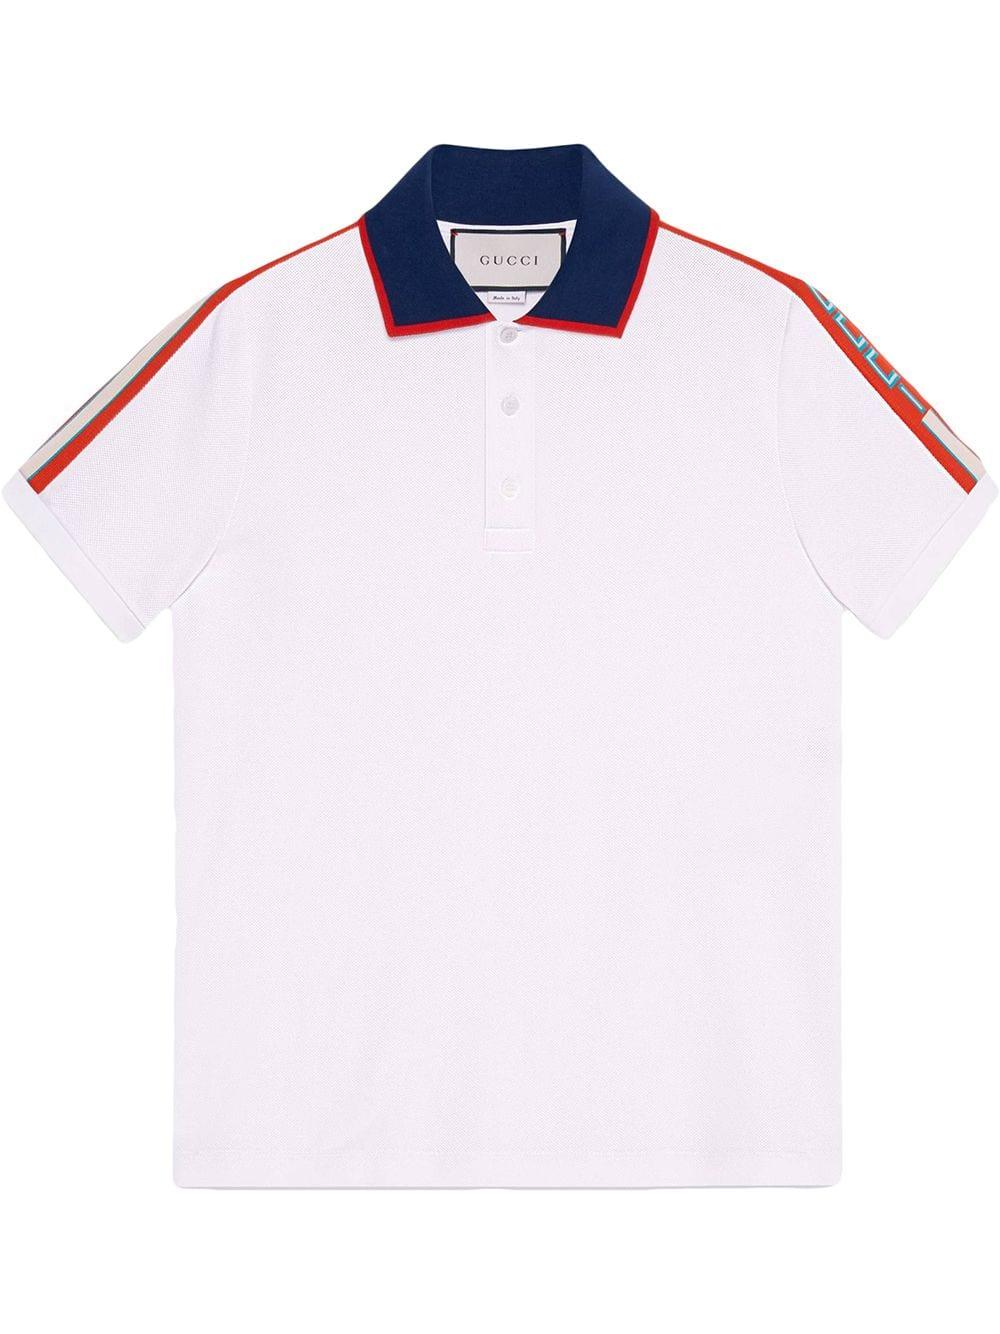 Civic les nationale vlag Gucci Cotton Polo With Stripe in White for Men | Lyst